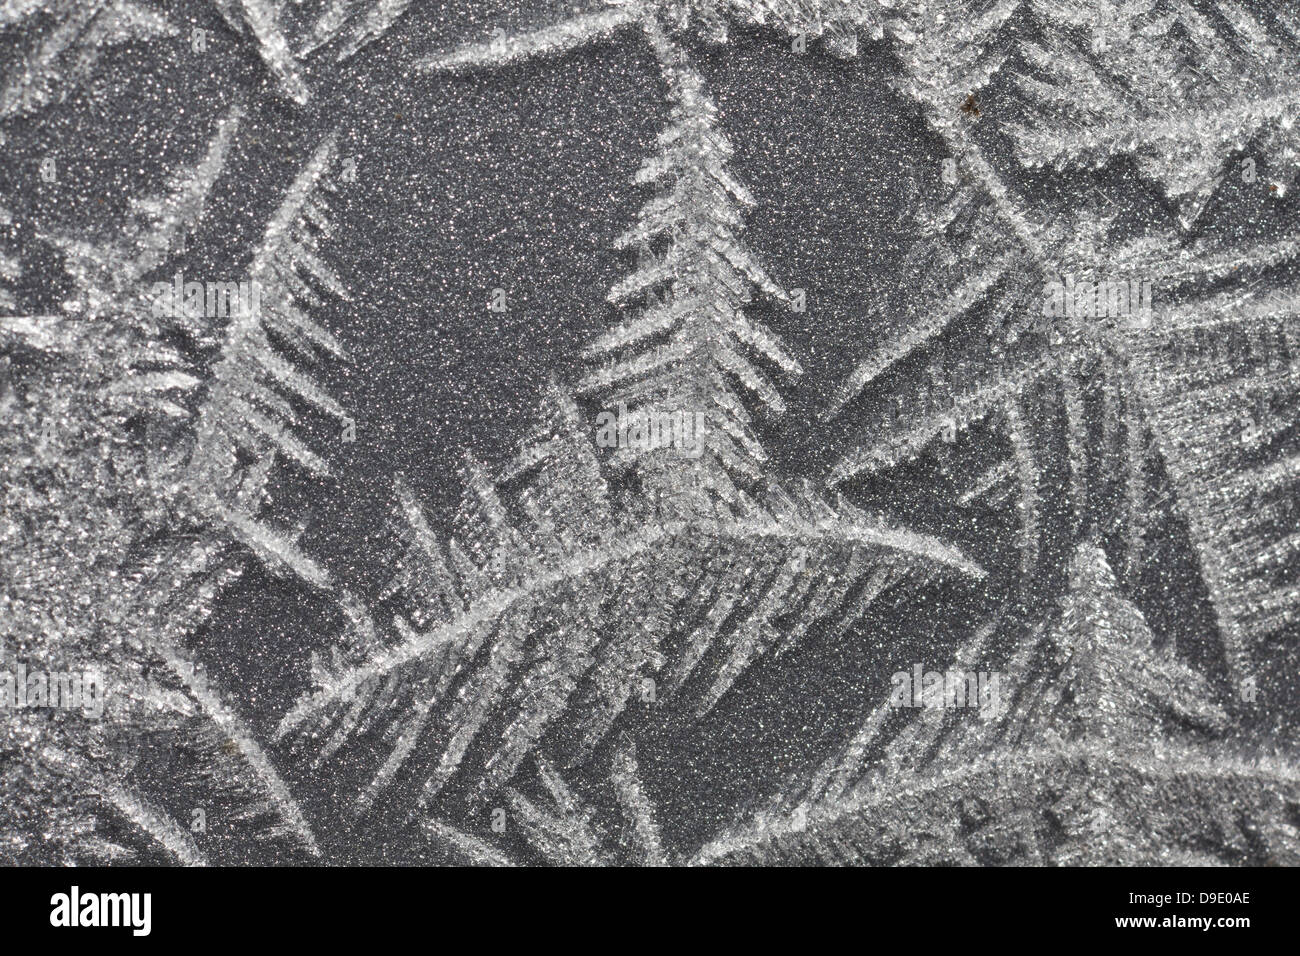 ice patterns formed on a car Stock Photo